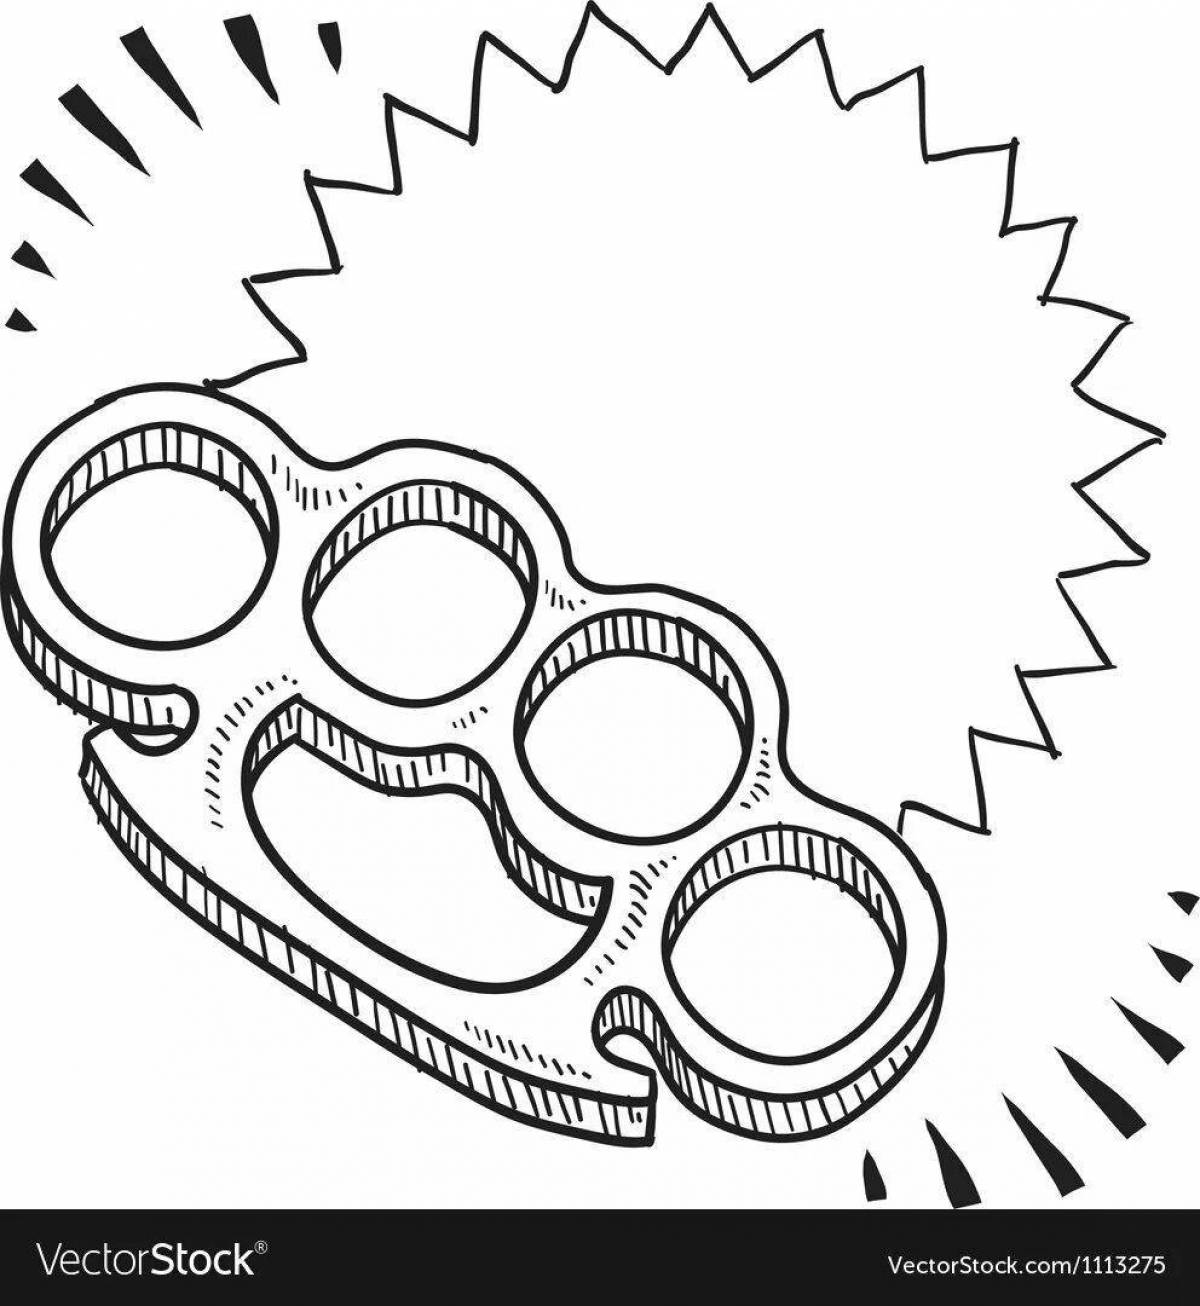 Brilliant brass knuckles coloring pages